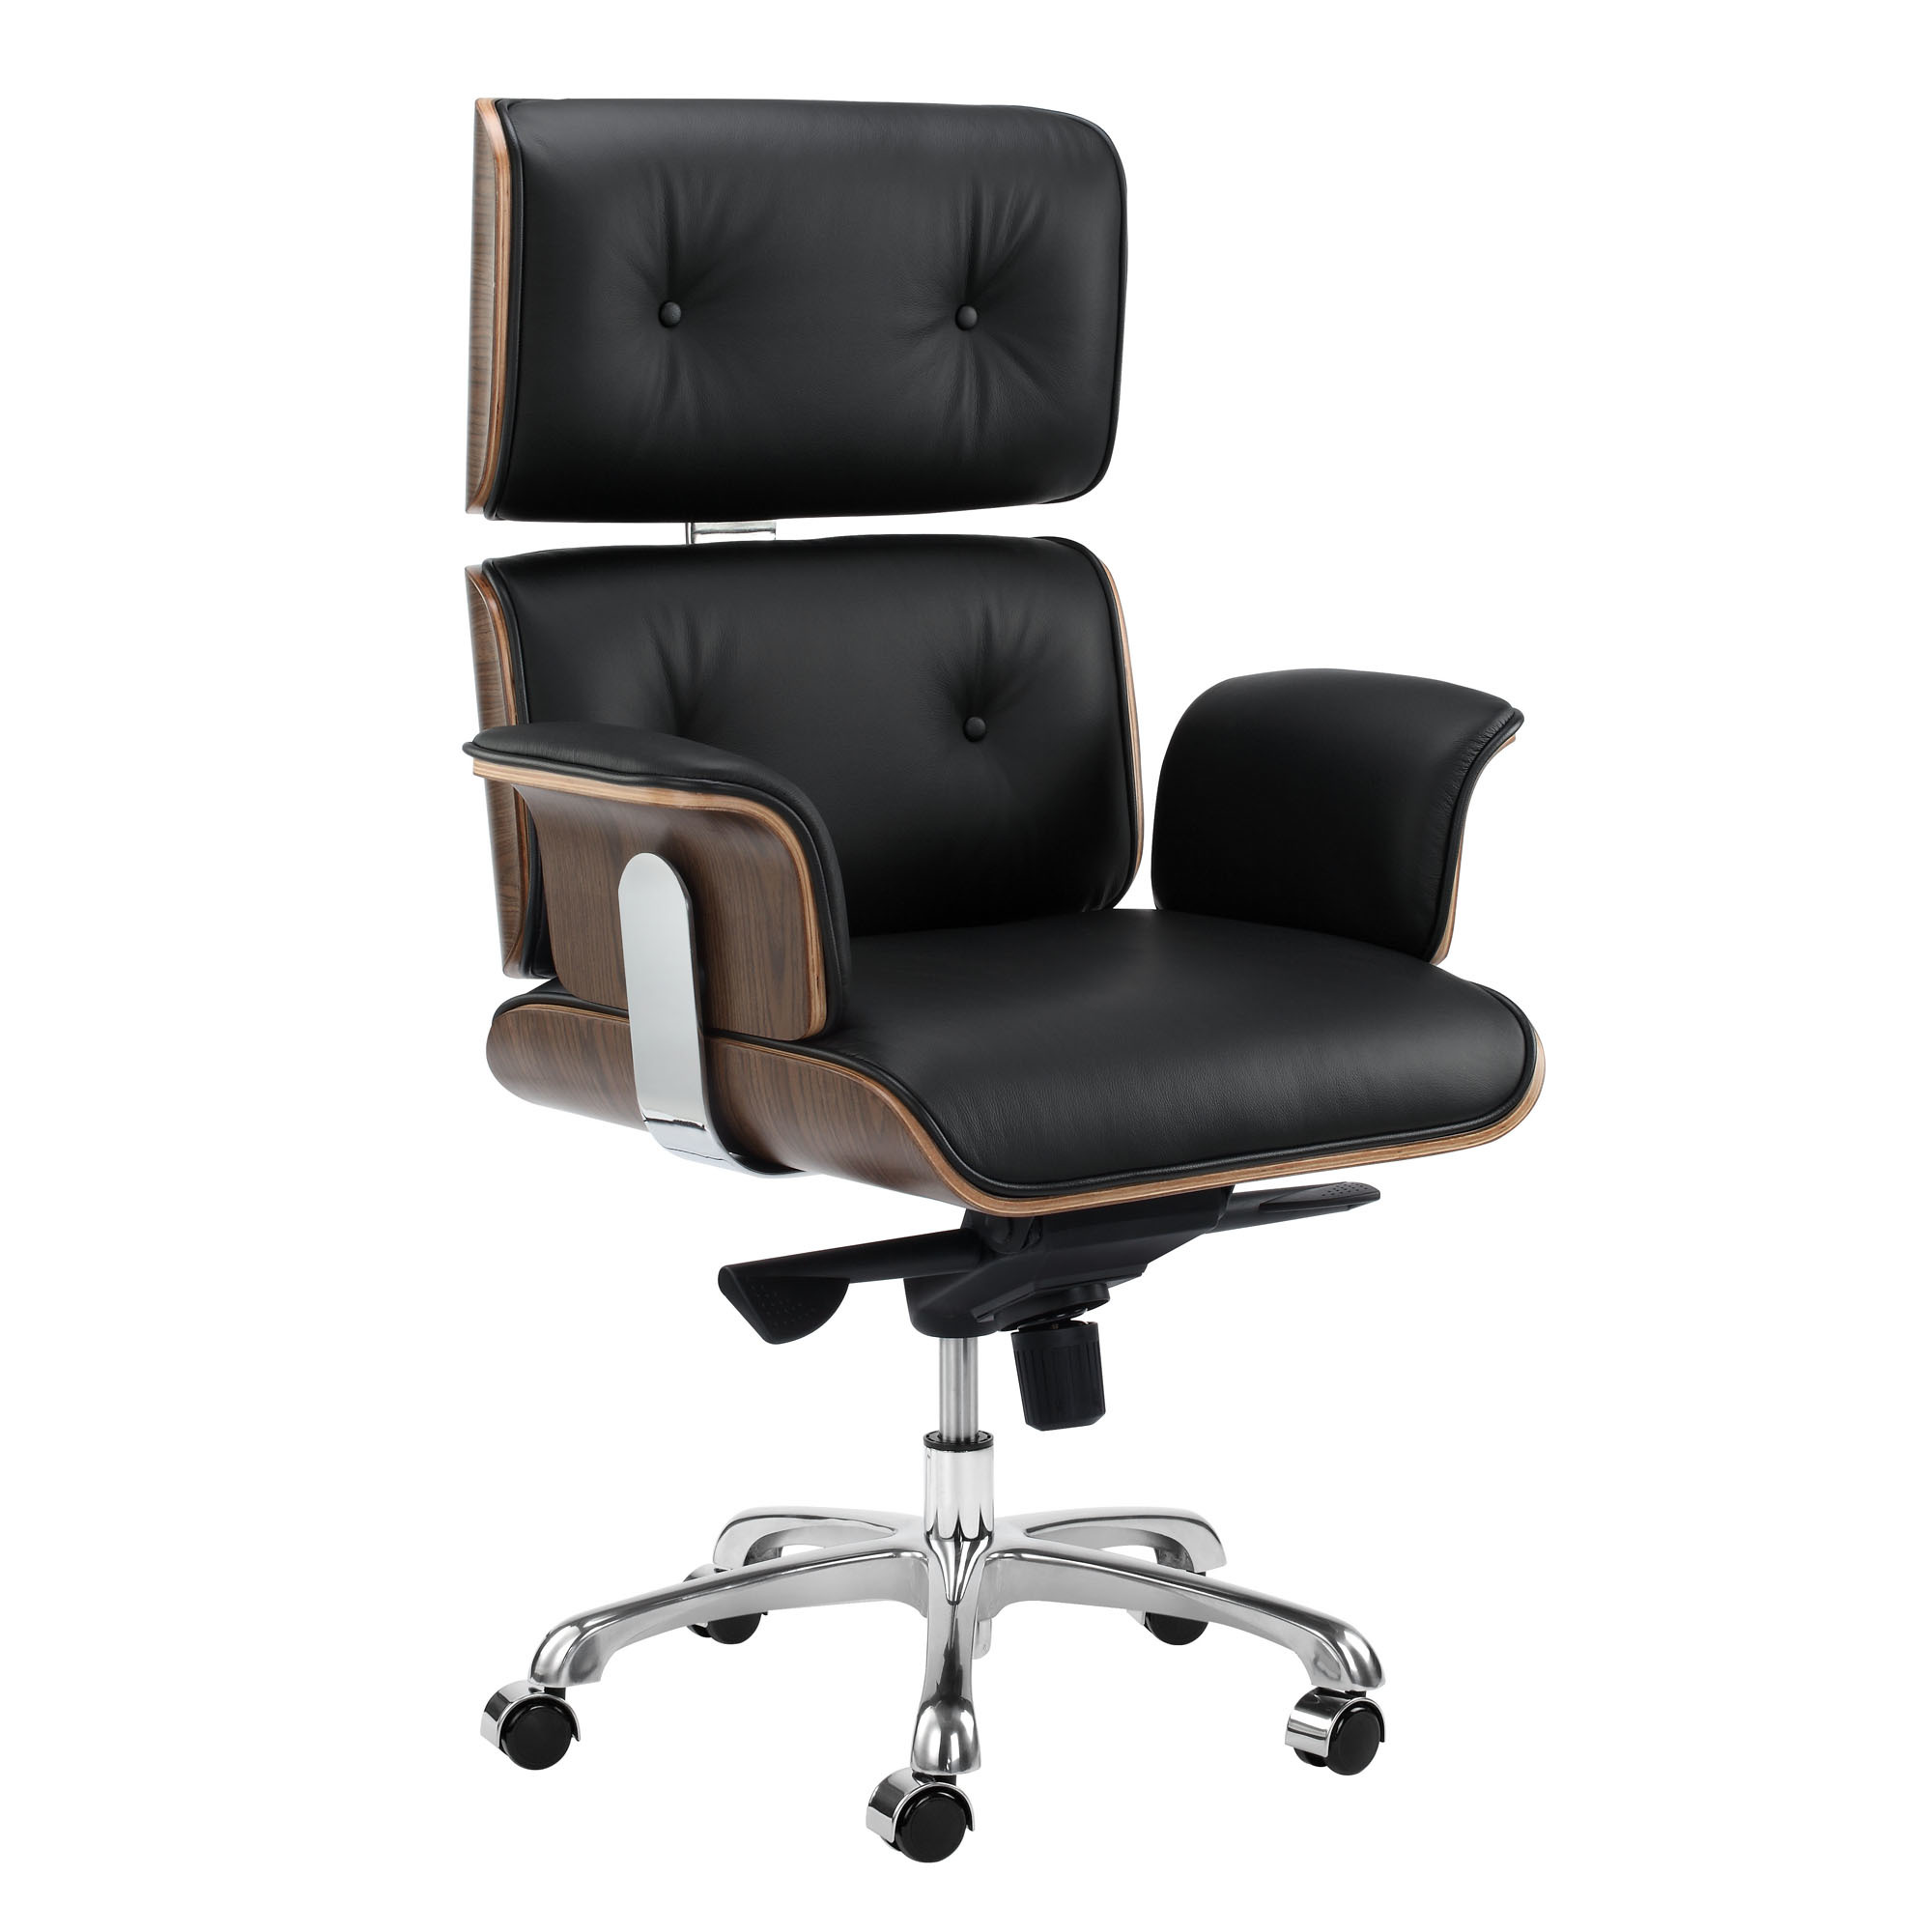 Milan Direct Eames Premium Leather Replica Executive Office Chair